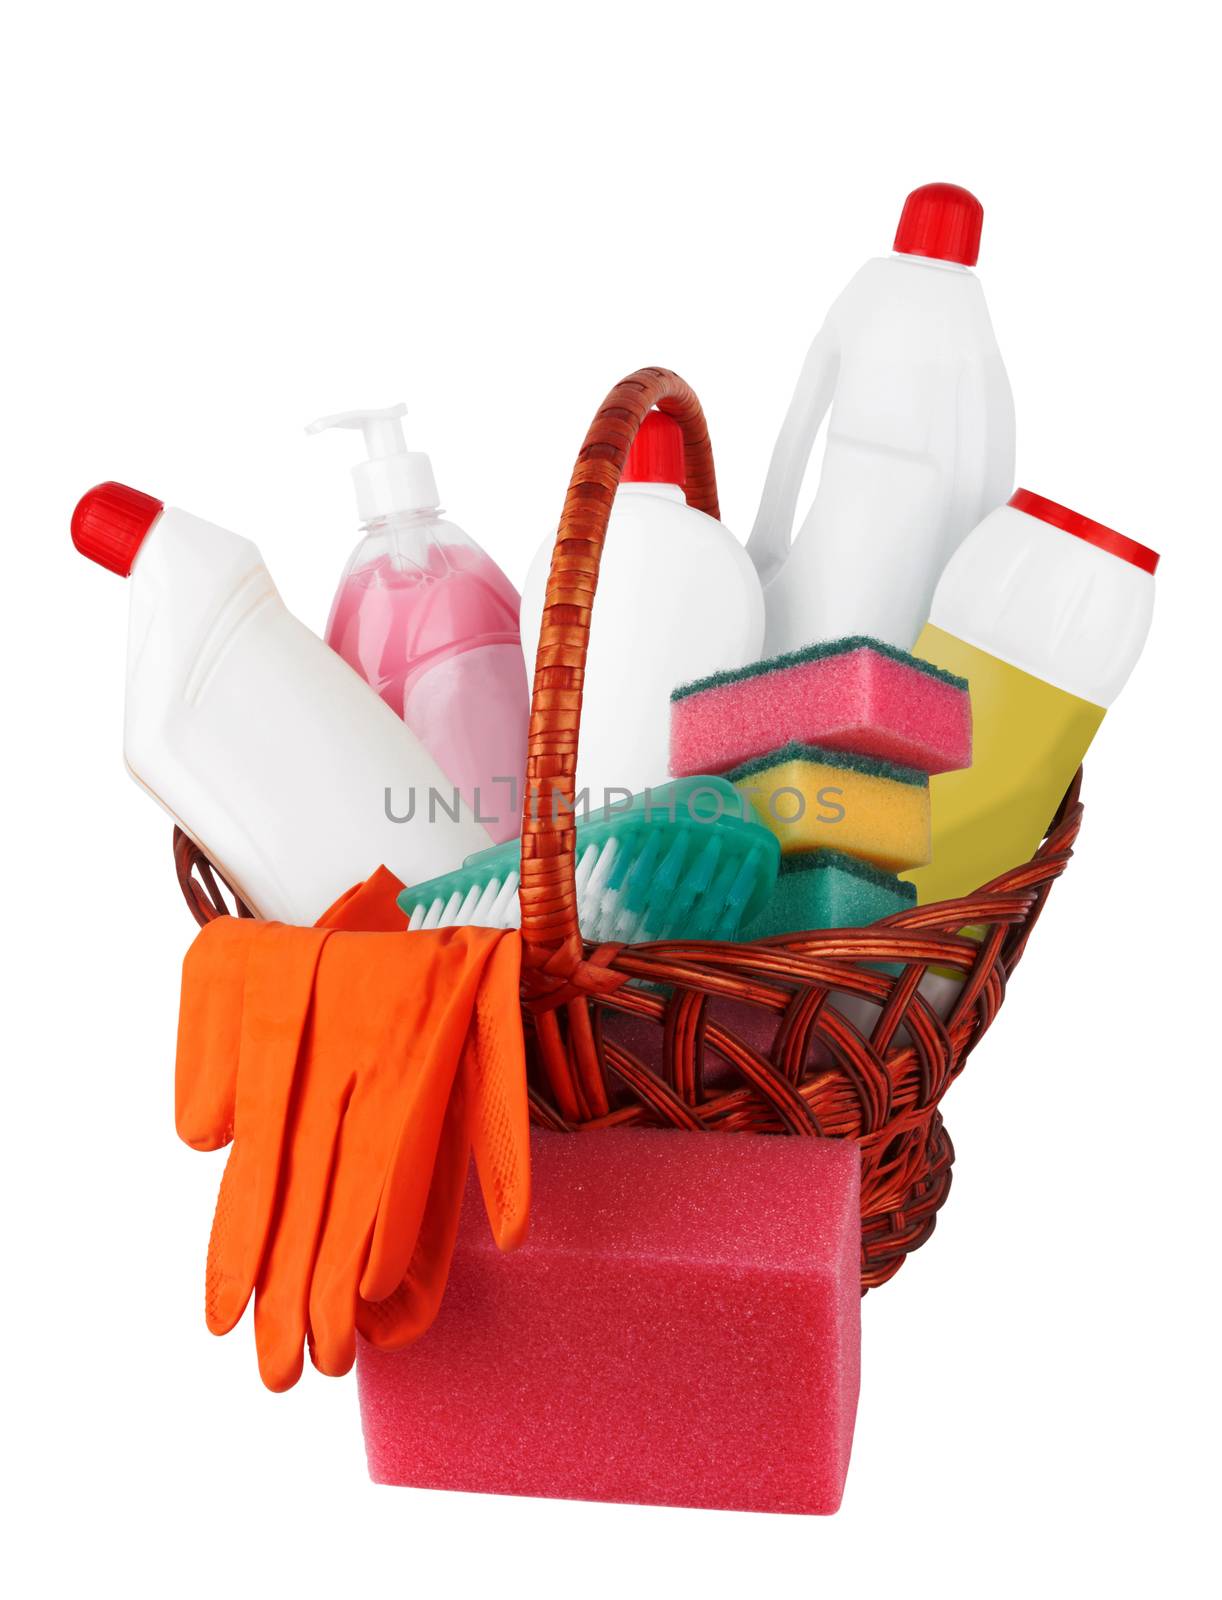 Assortment of means for cleaning on white